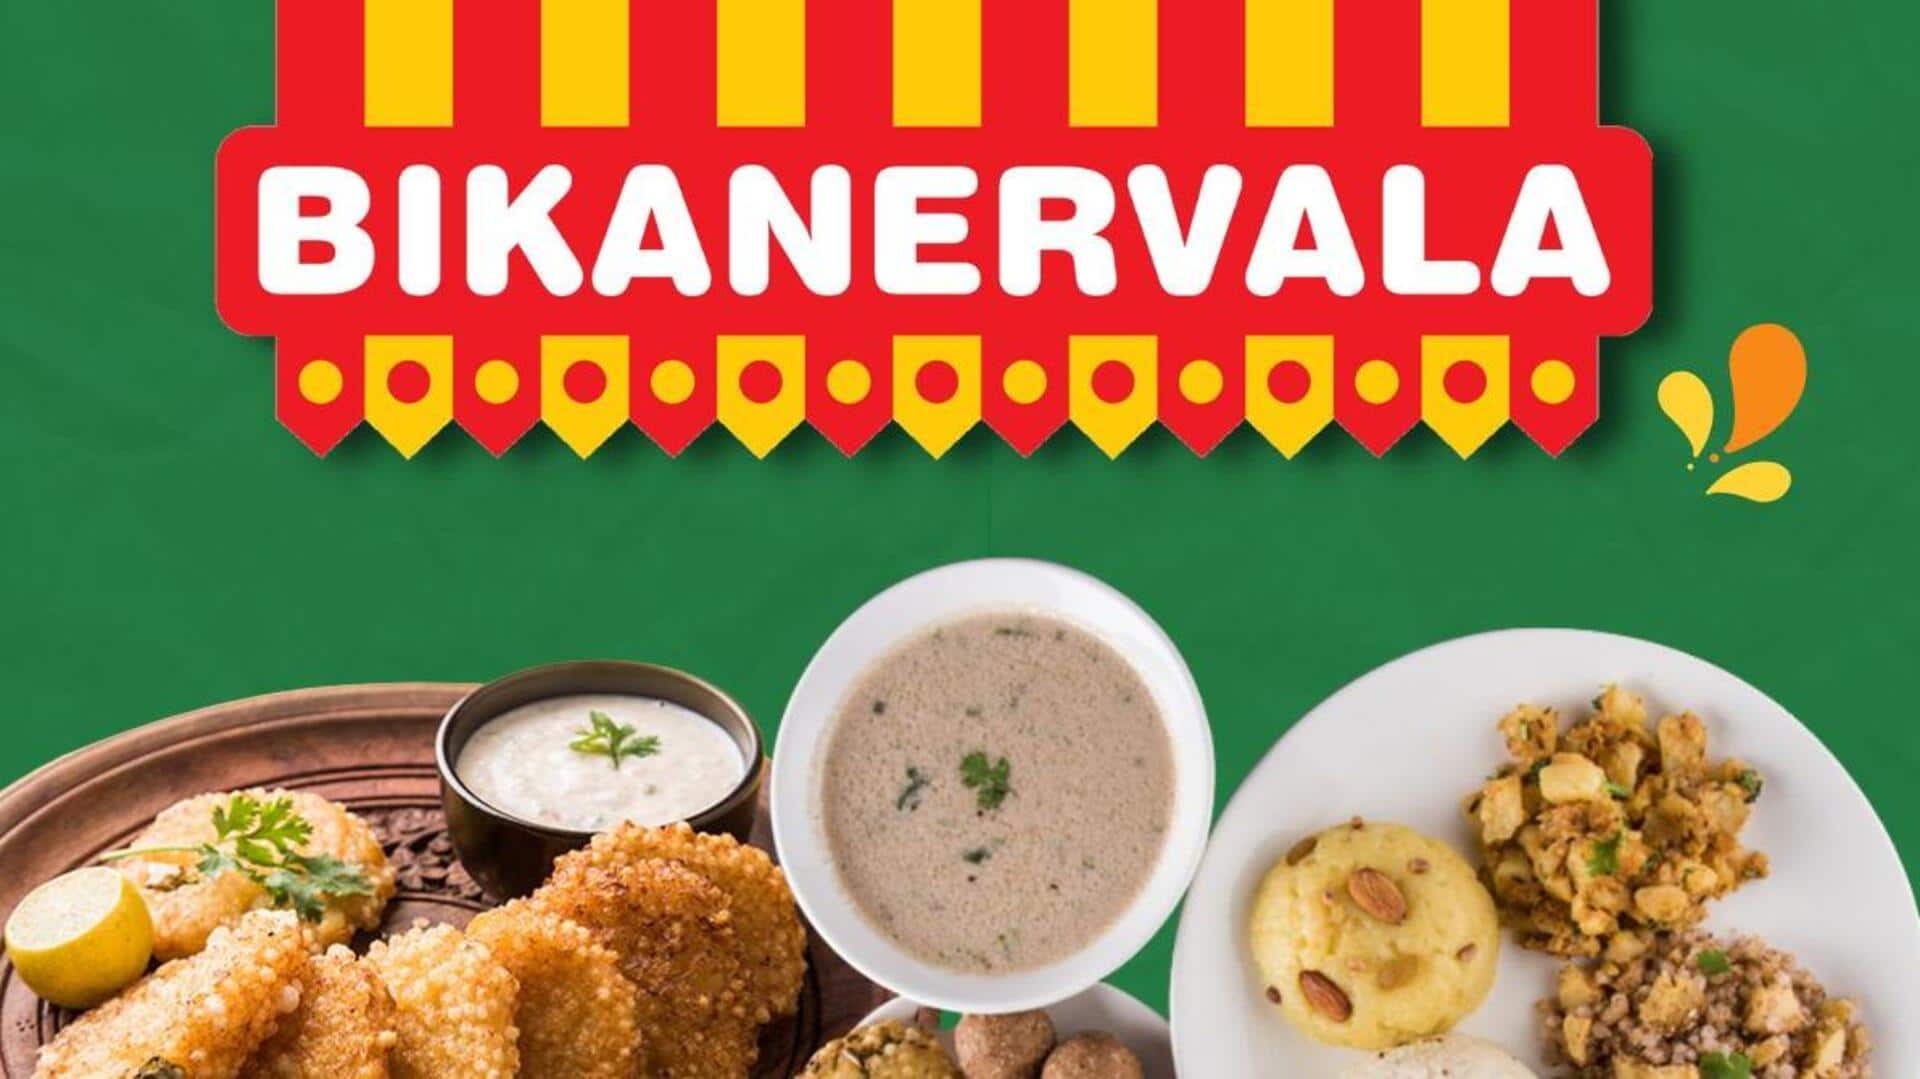 Bikanervala partners with The Montana Group to reach wider audience